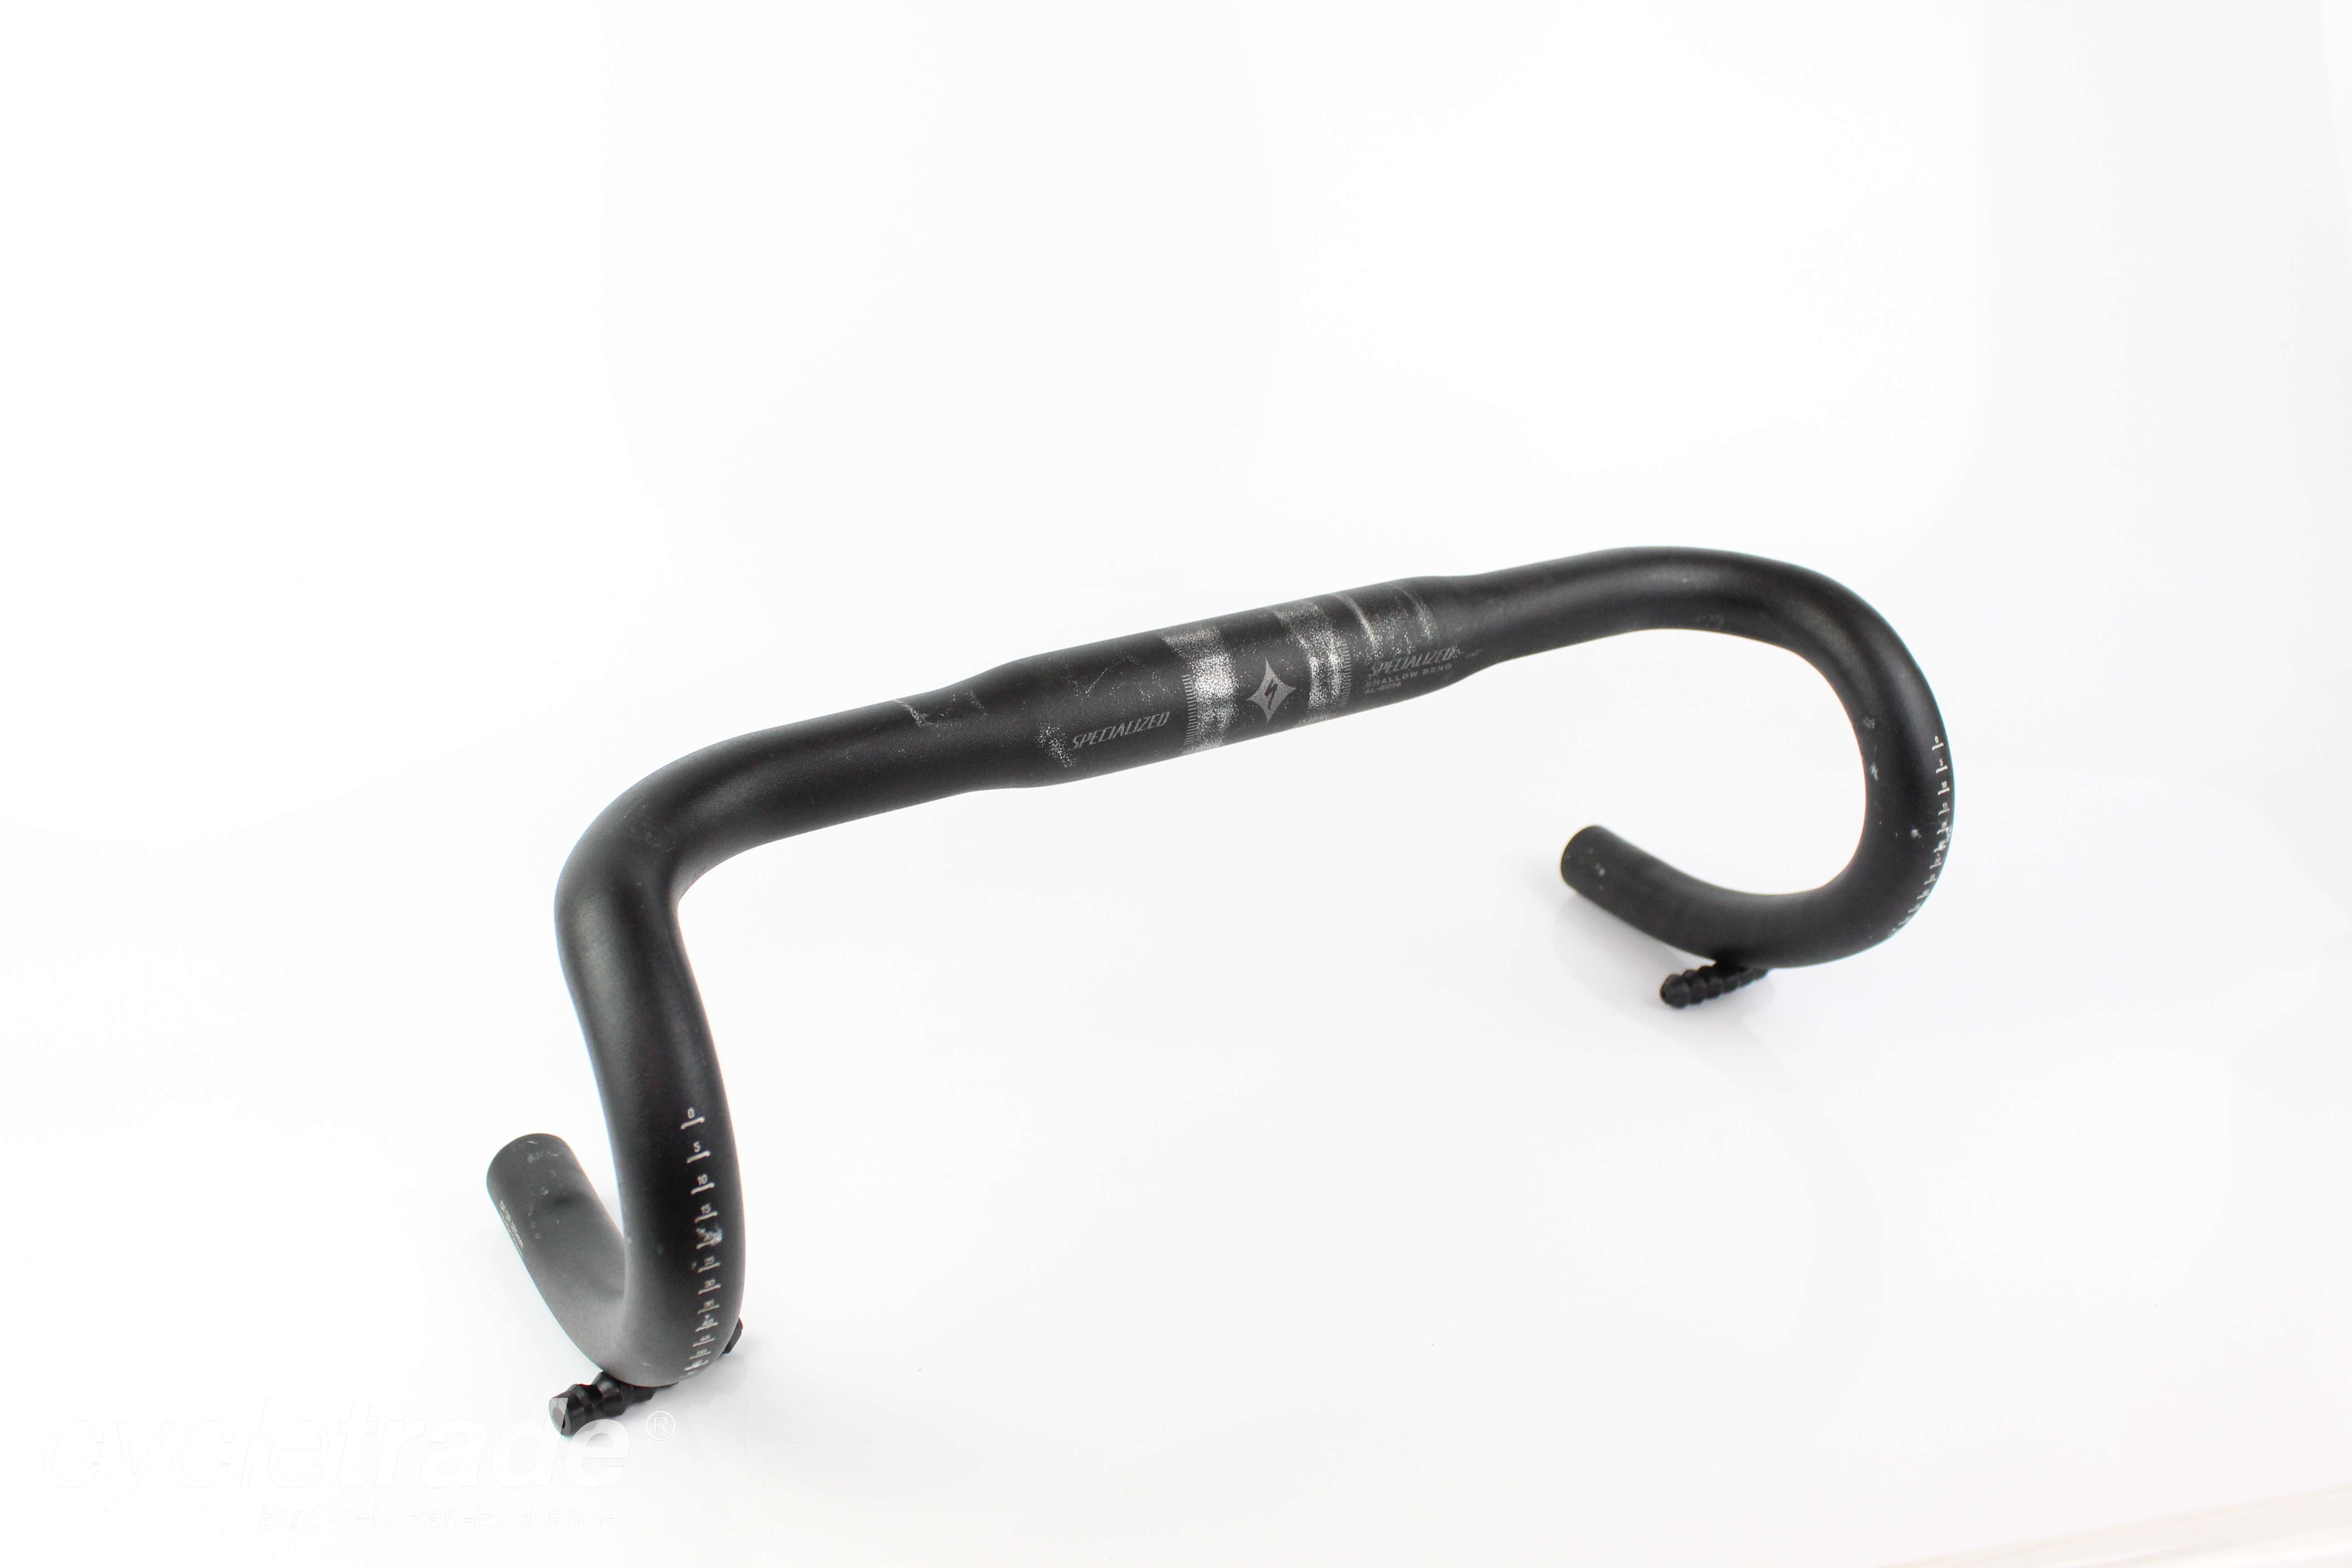 Drop Handlebar- Specialized Shallow Bend 360mm 31.8mm Clamp - Grade B